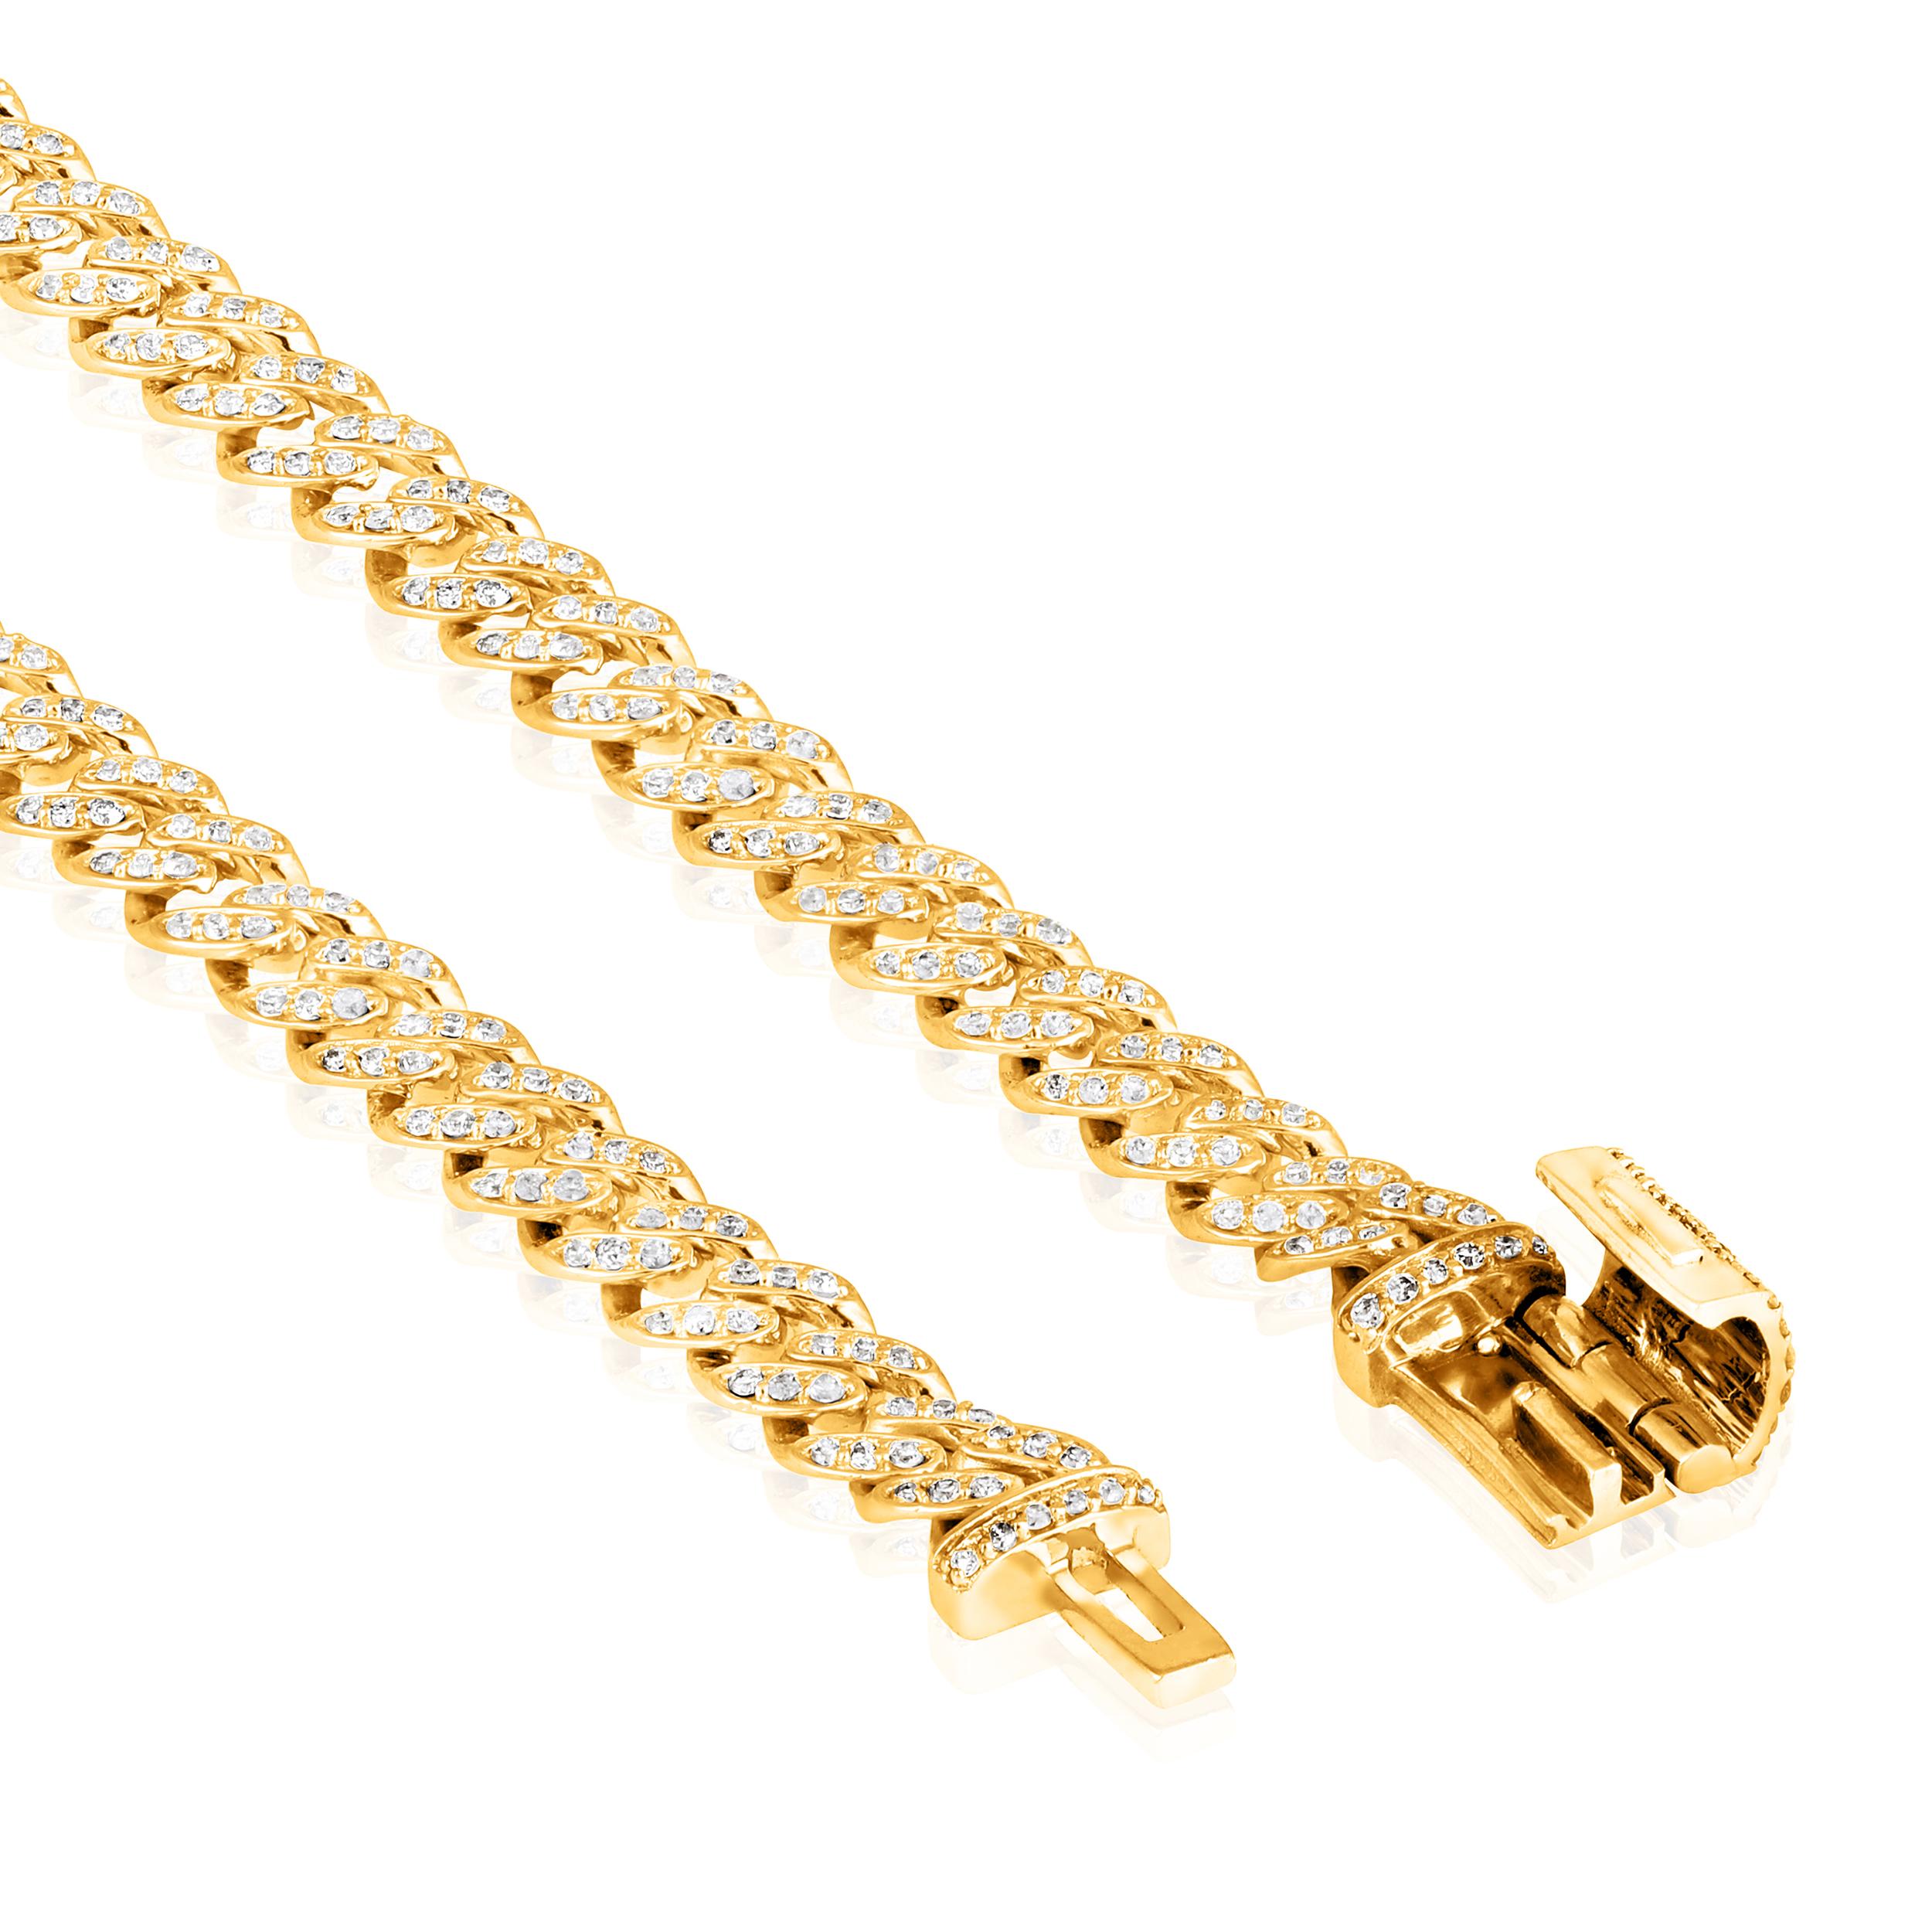 Crafted in 5.58 grams of 10K Yellow Gold, the bracelet contains 432 stones of Round Diamonds with a total of 0.83 carat in F-G color and I1-I2 carat. The bracelet length is 7 inches.

This jewelry piece will be expertly crafted by our skilled